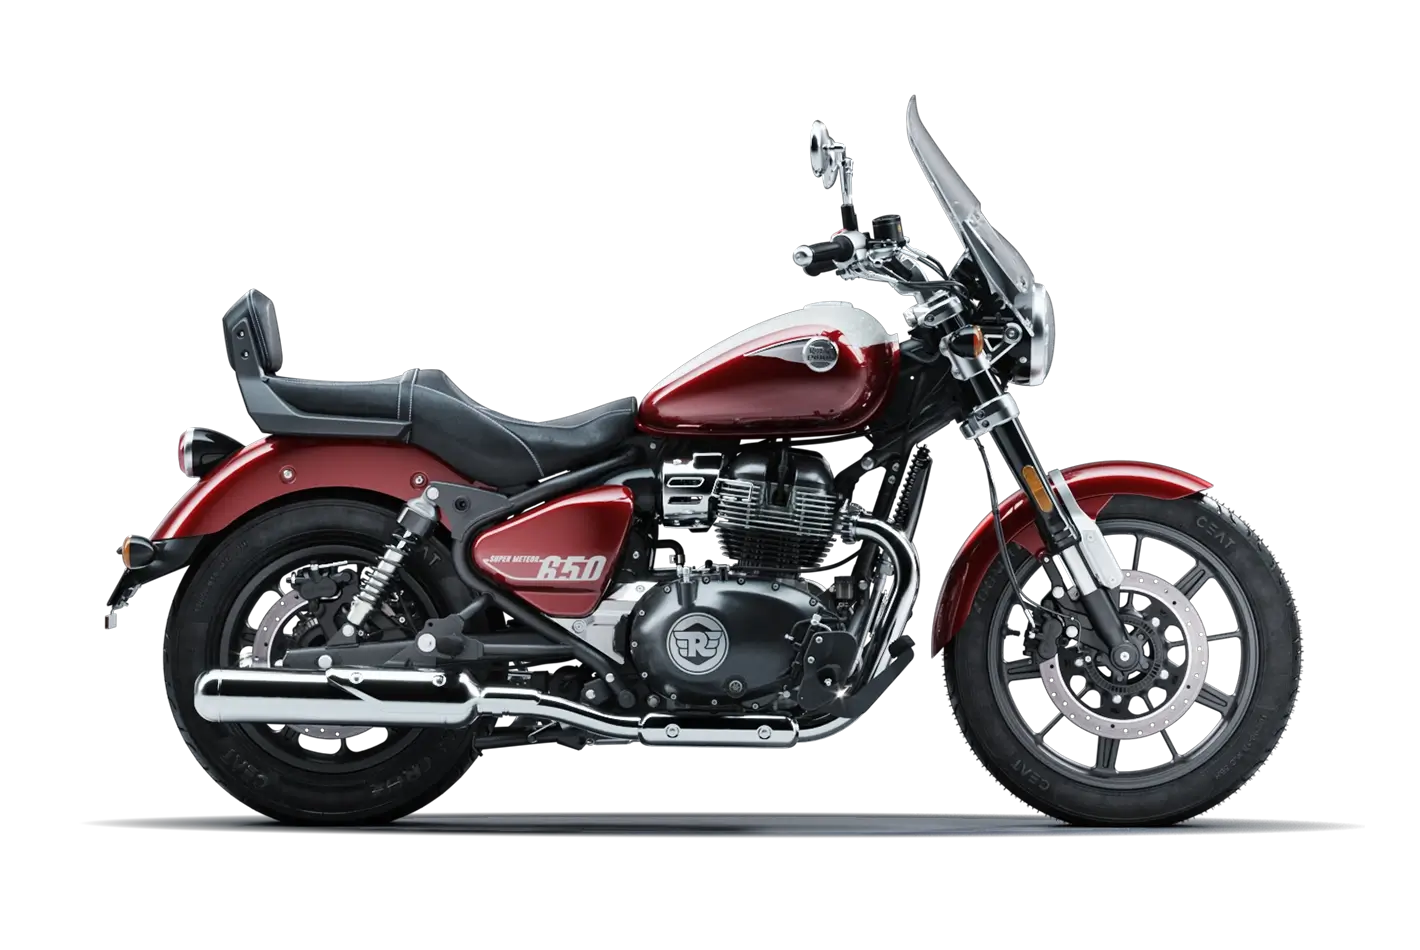 Royal Enfield Super Meteor 650 - Celestial Red